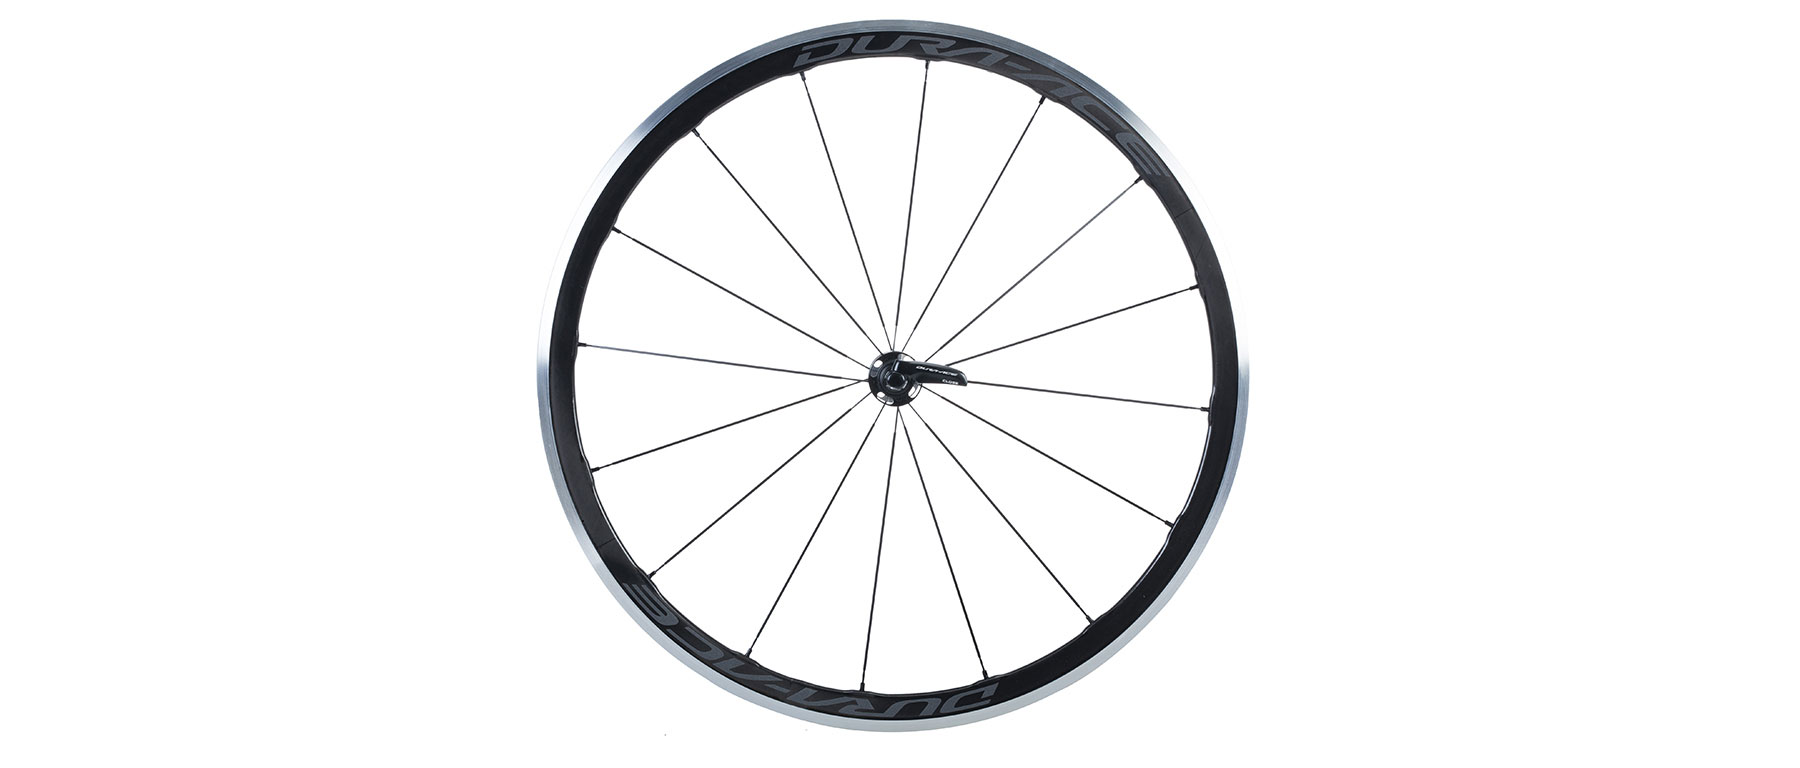 Shimano Dura-Ace WH-R9100 C40-CL Wheelset